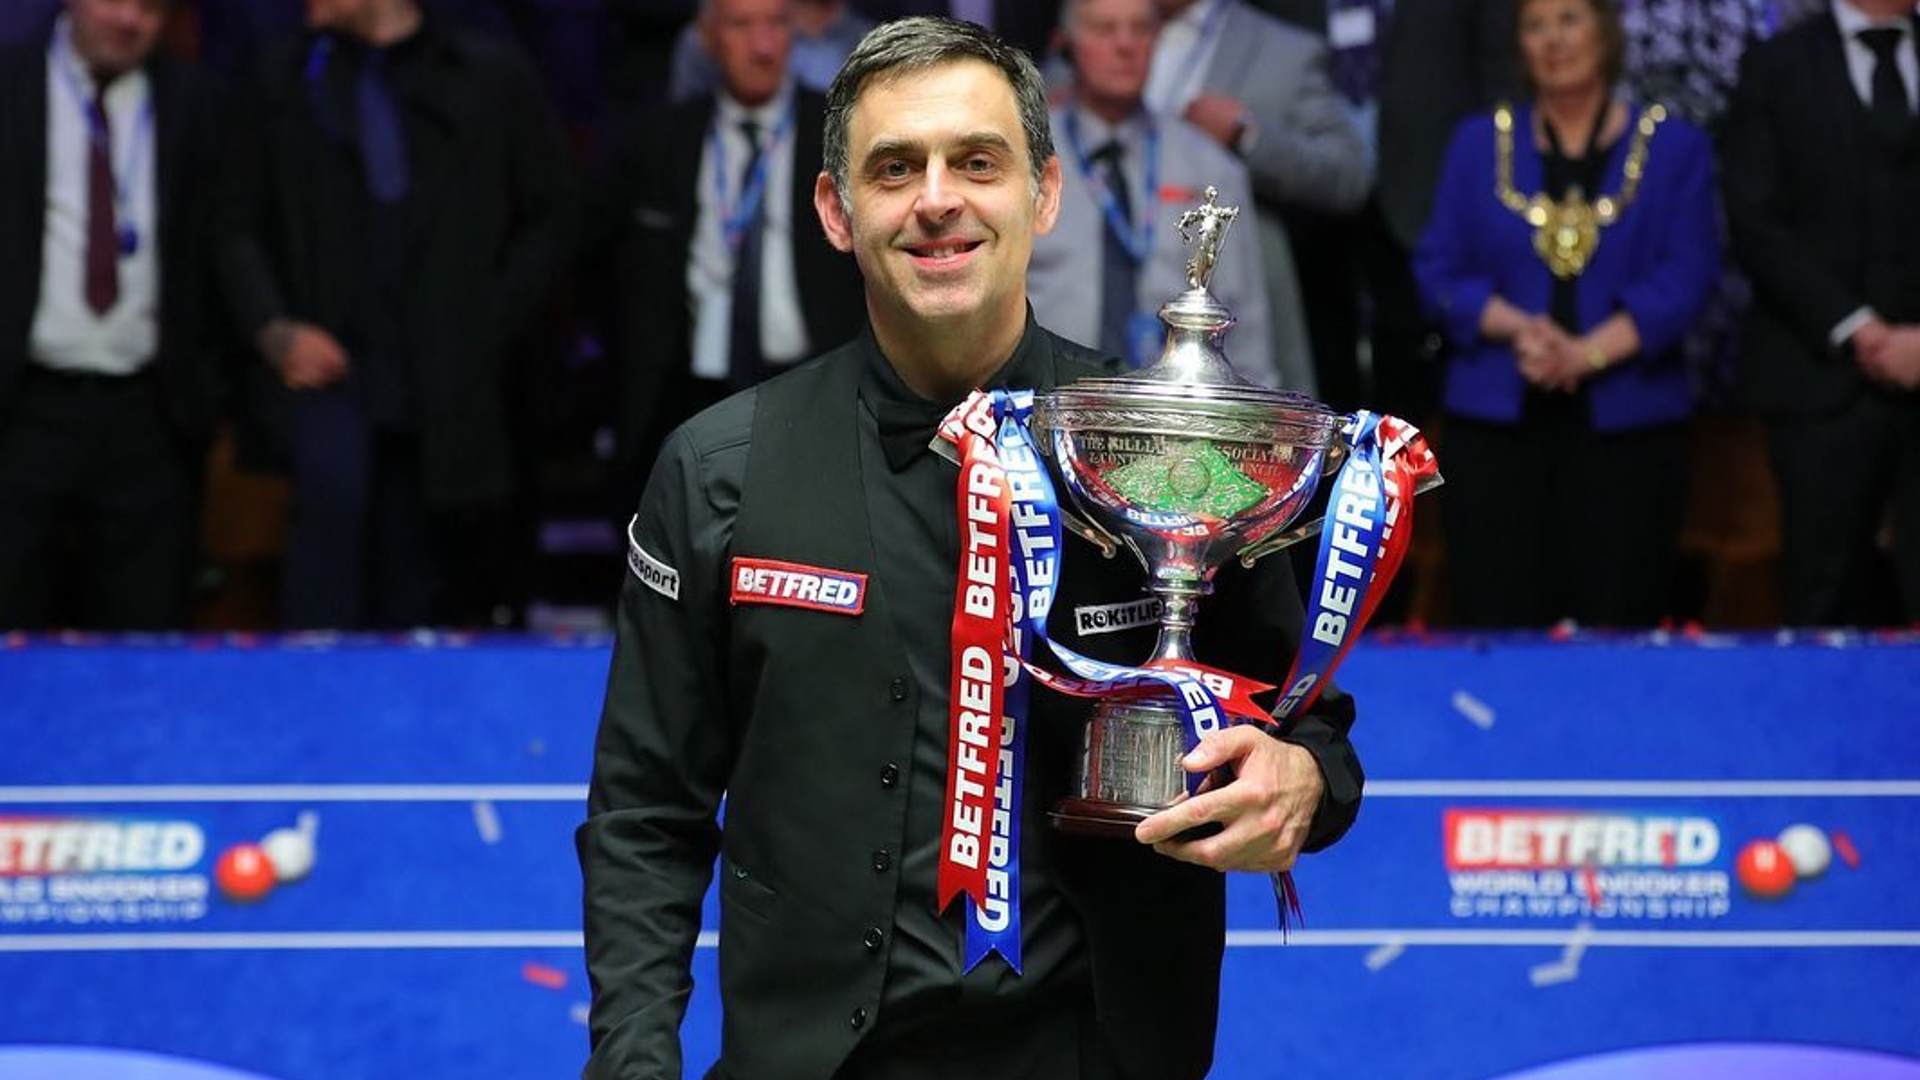 What are the biggest Snooker tournaments in the world?